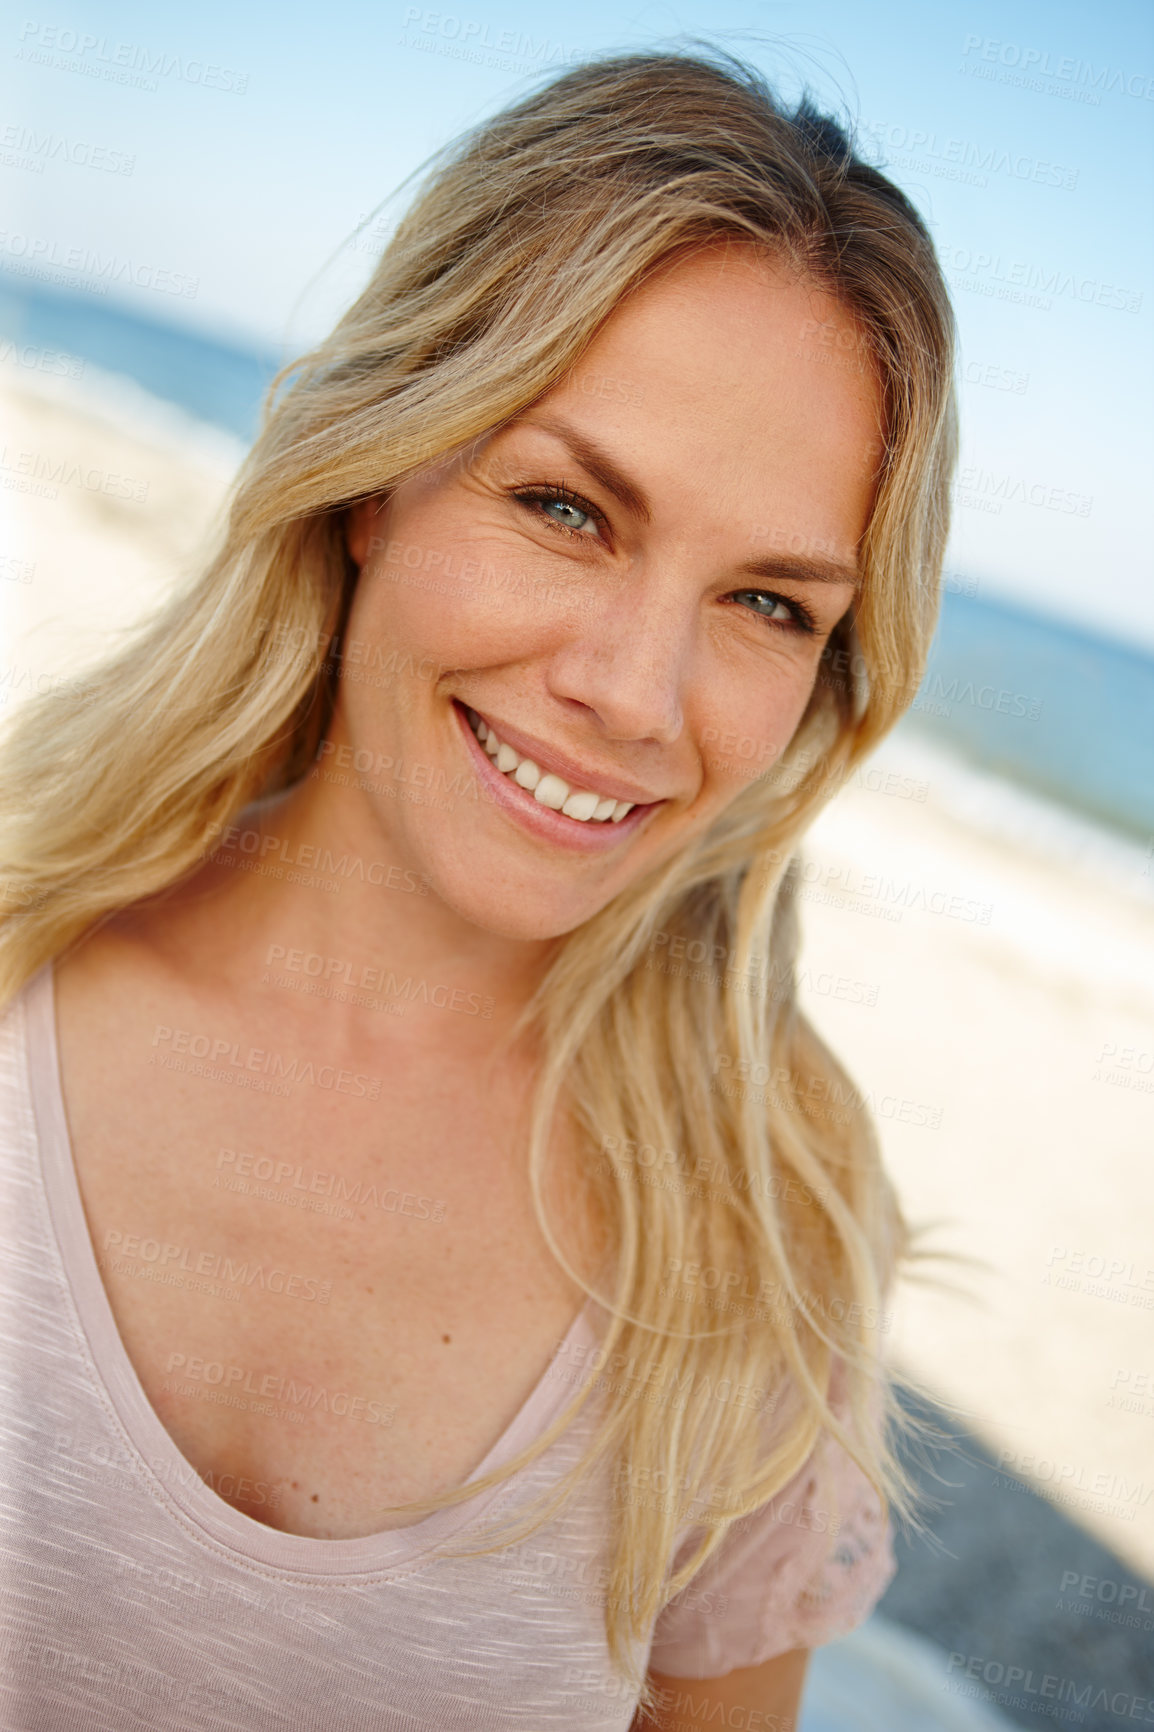 Buy stock photo Head and shoulders portrait of an attractive young woman standing on a sunny beach